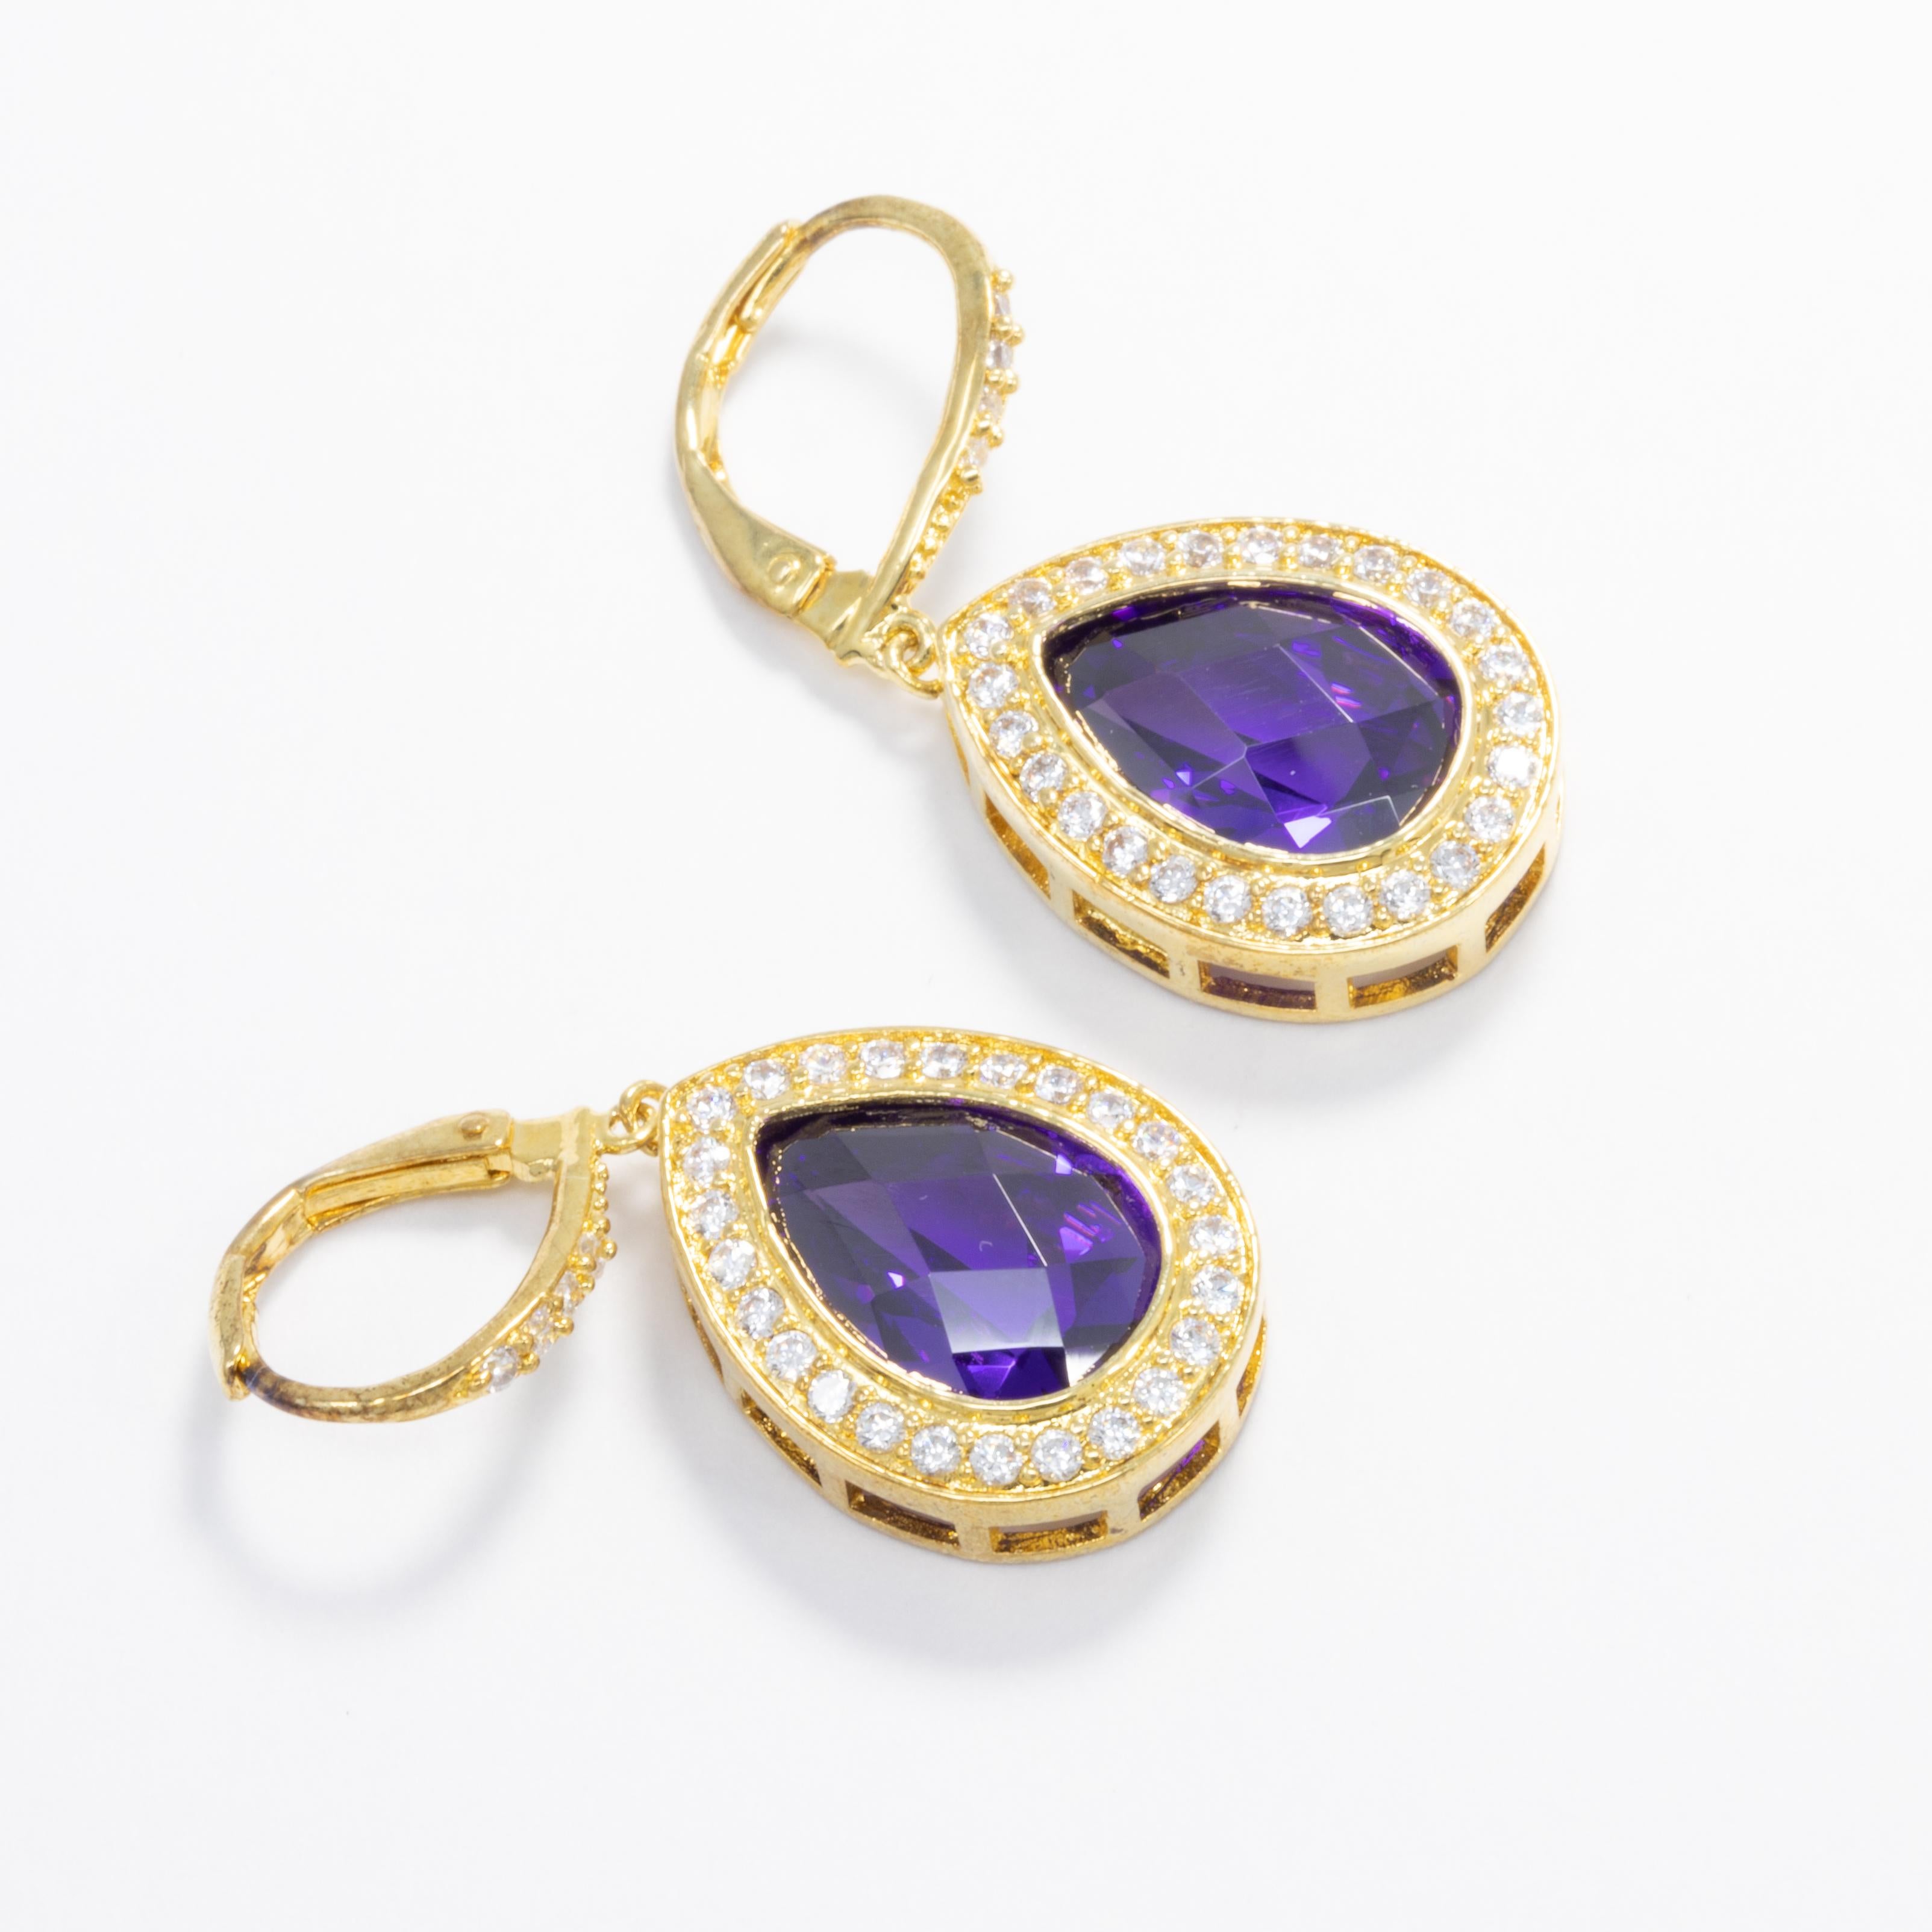 Add some sparkle to your outfit with these gold plated pear dangle earrings by Kenneth Jay Lane.

Clear and purple amethyst cubic zirconia crystals. Lever hook closure.

Marks/Hallmarks: KJLane

CZ by Kenneth Jay Lane line. Designed in New York.